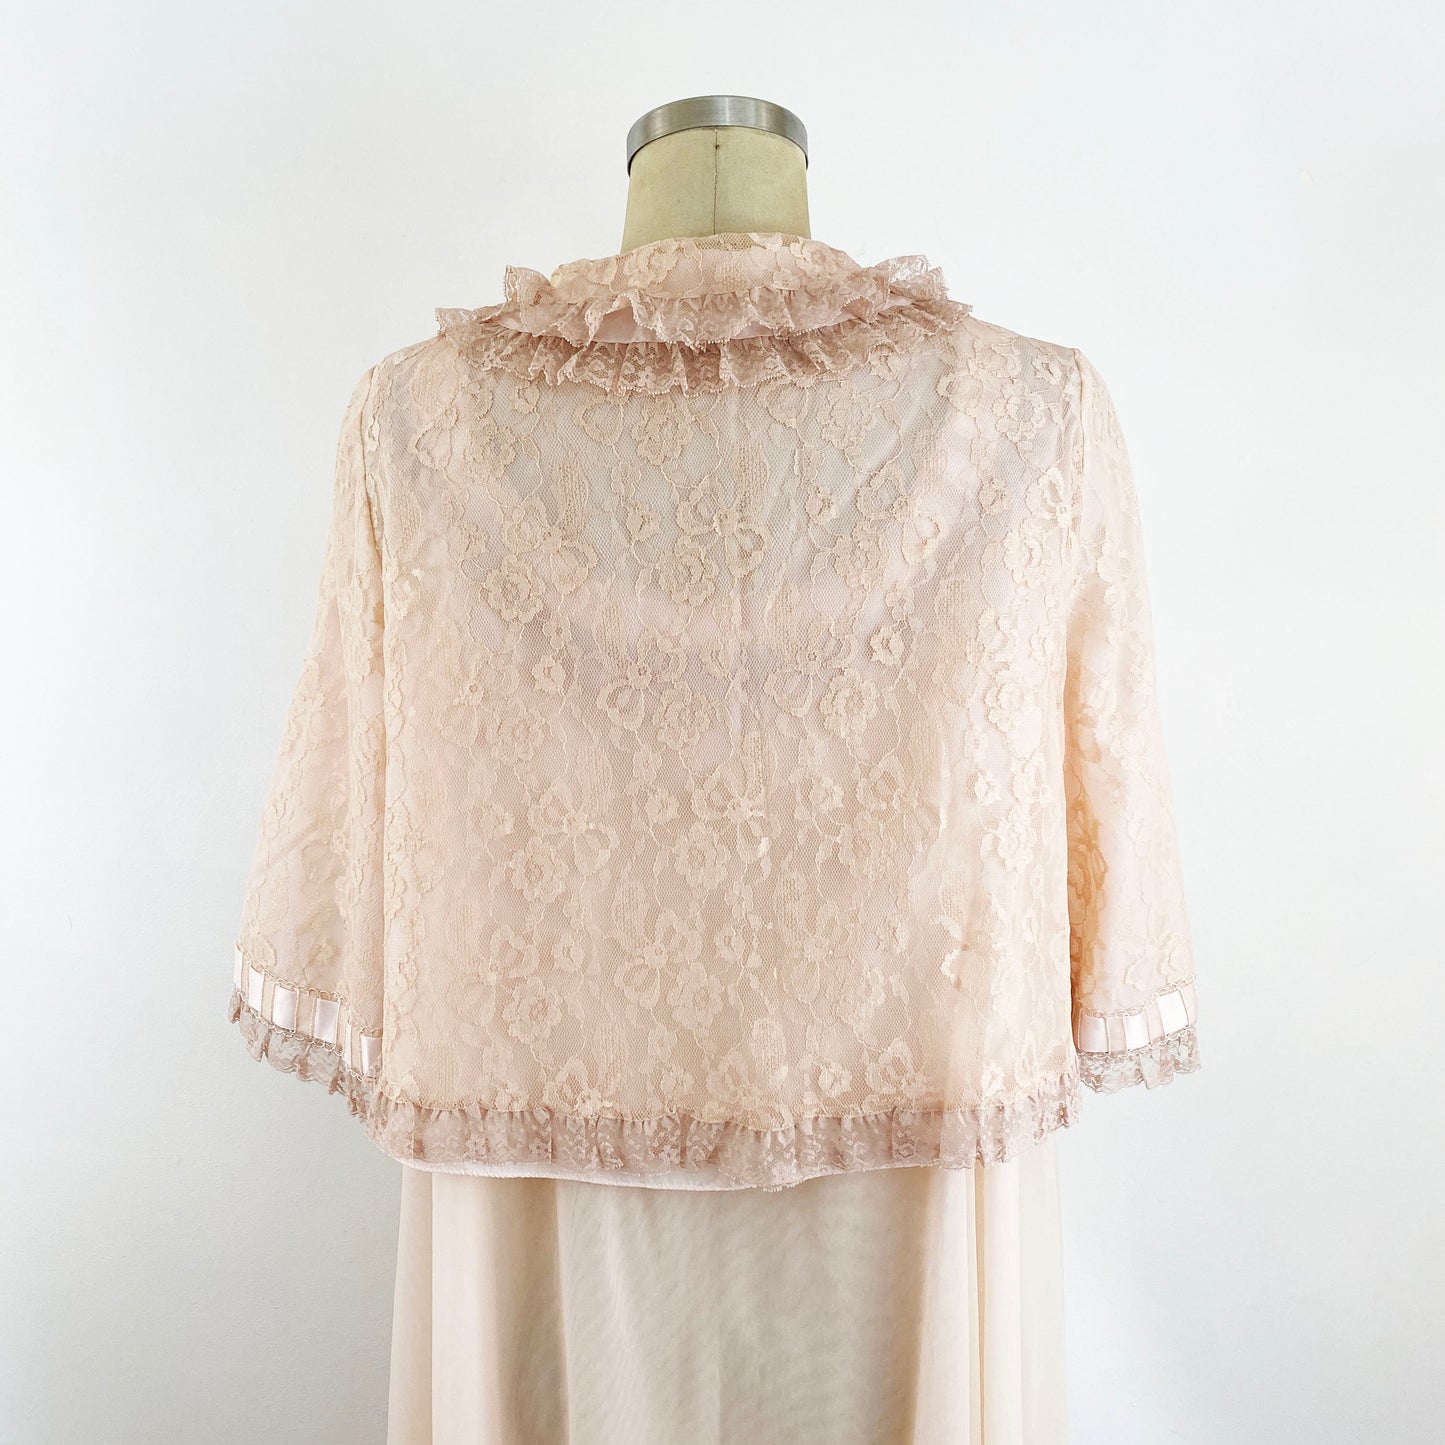 1950s Odette Barsa Lingerie Pink and Tan Overlay Nylon Chiffon and Lace Three Piece Peignoir Set Slip, Robe, and Bed Coat / Medium